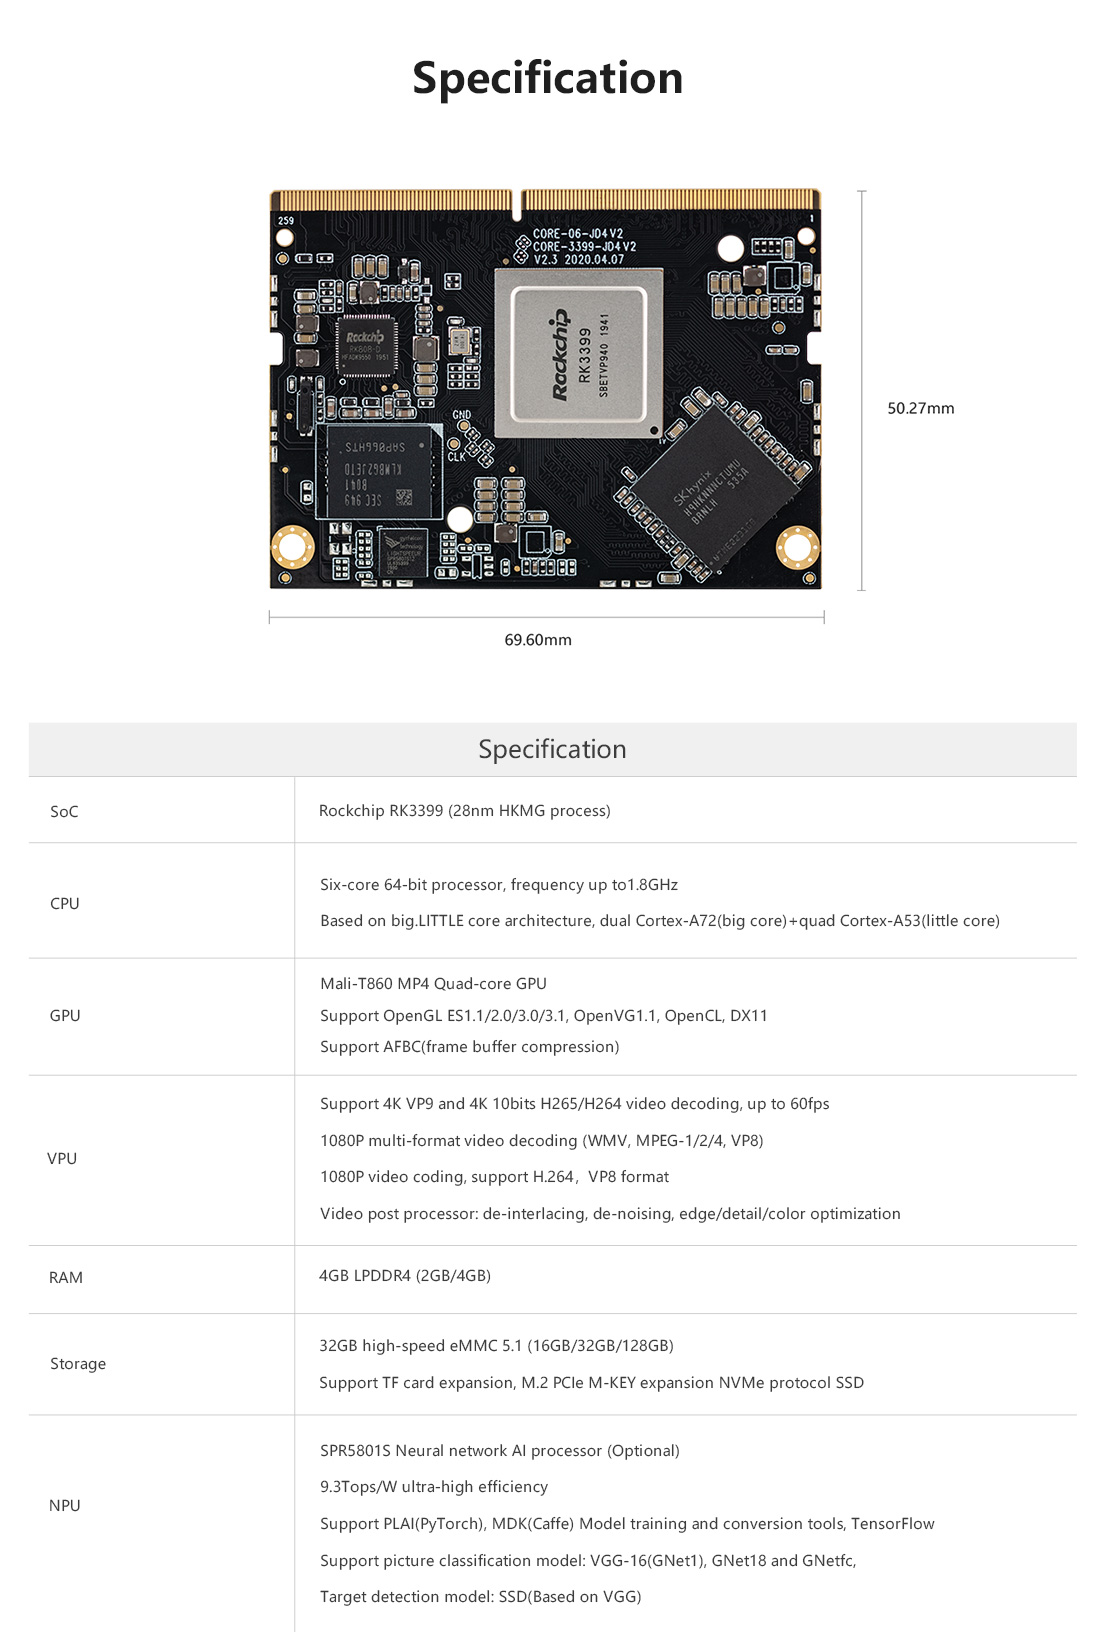 Specifications Core-3399JDV2